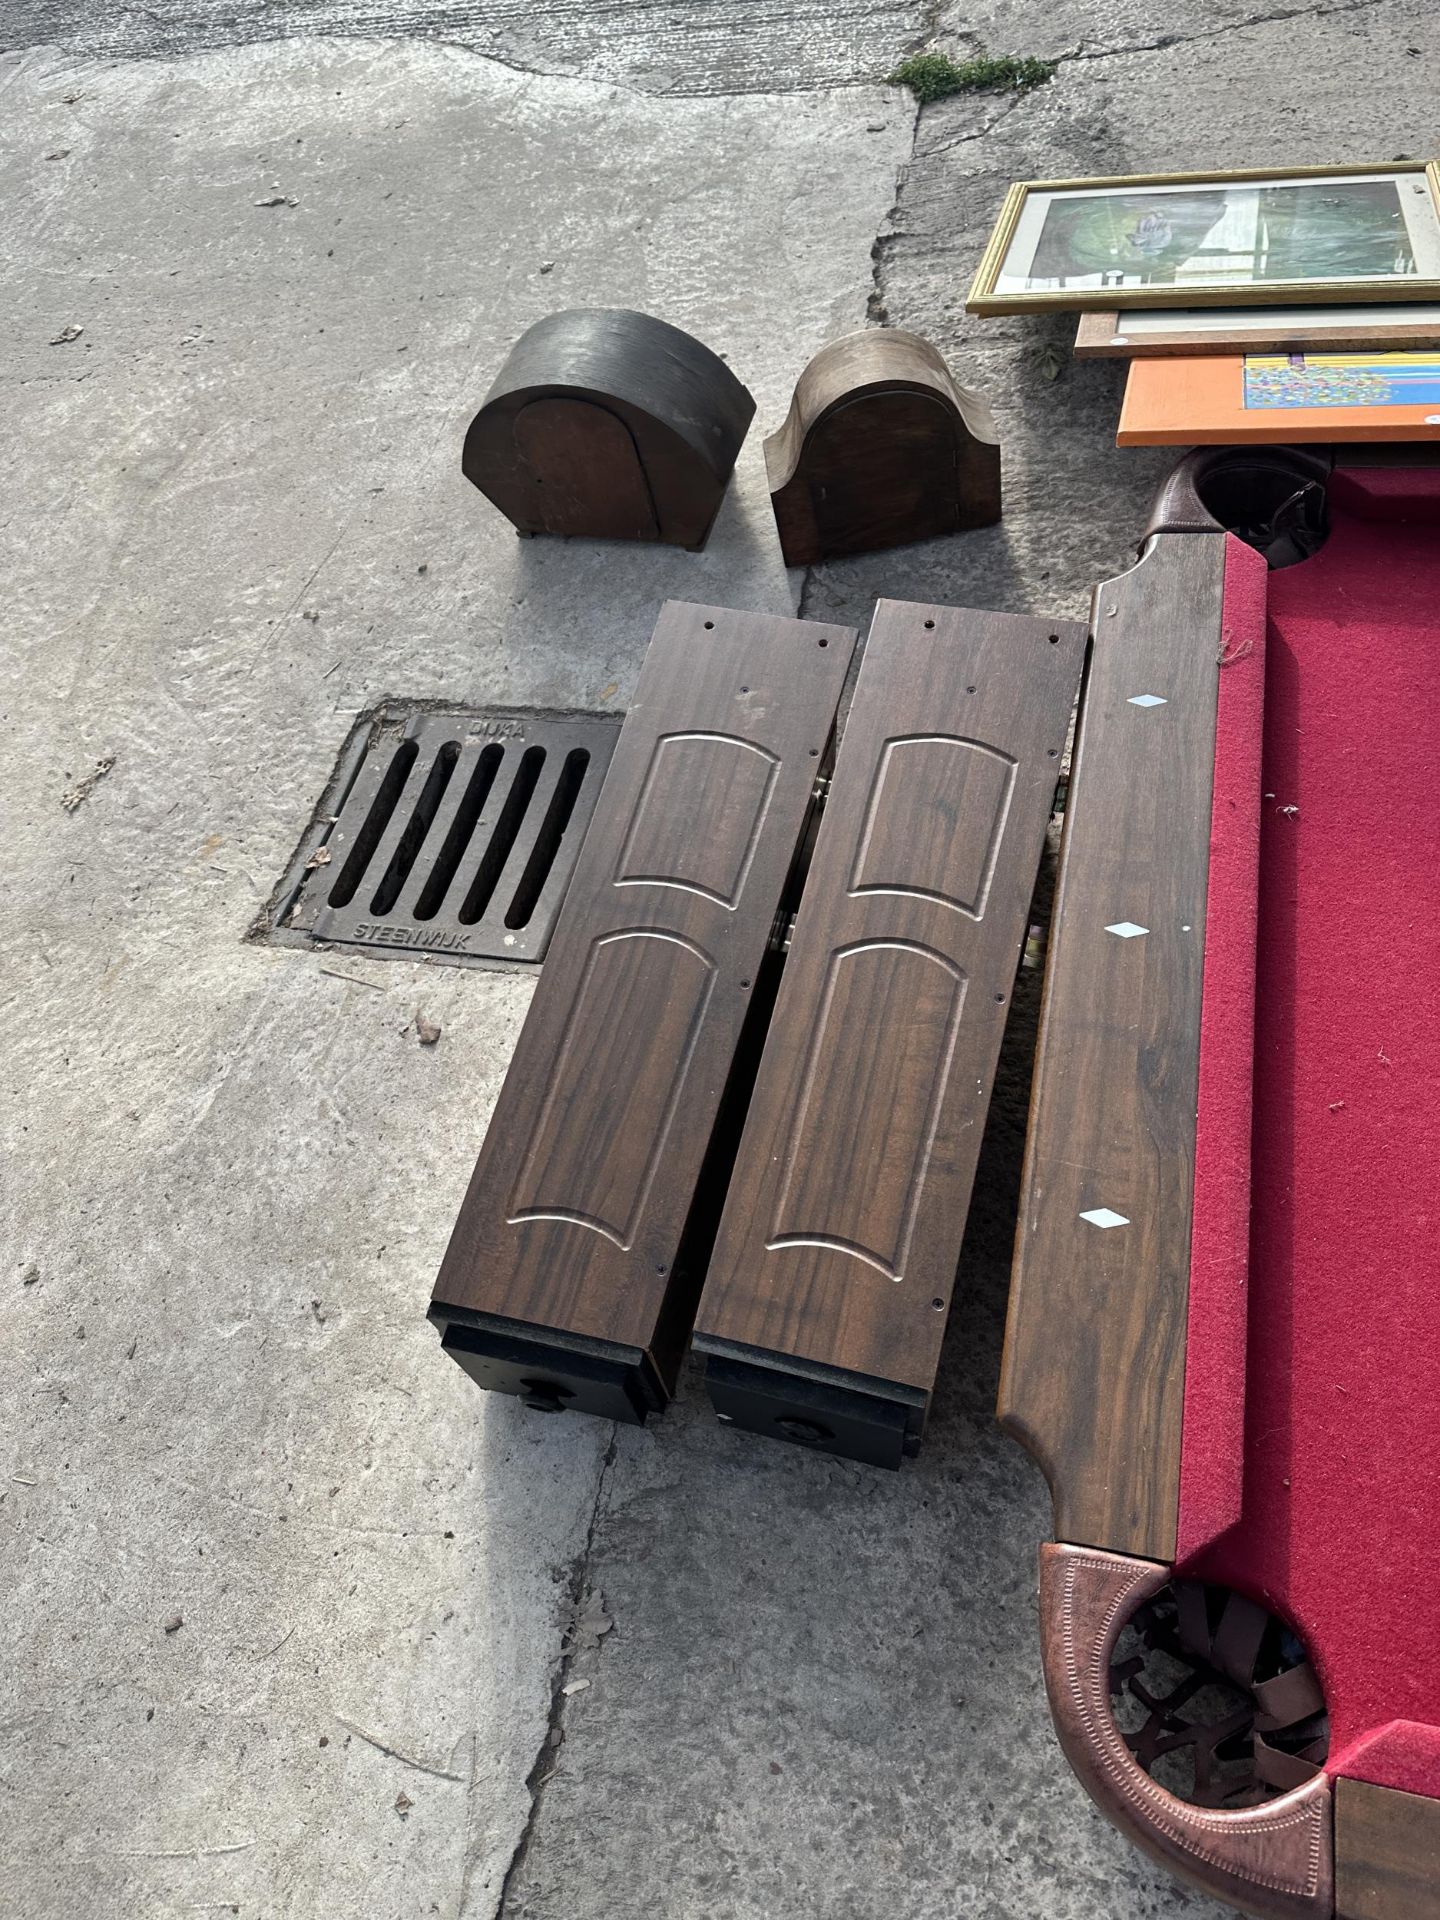 A LARGE POOL TABLE WITH TWO CUES AND A SET OF BALLS - Image 6 of 6